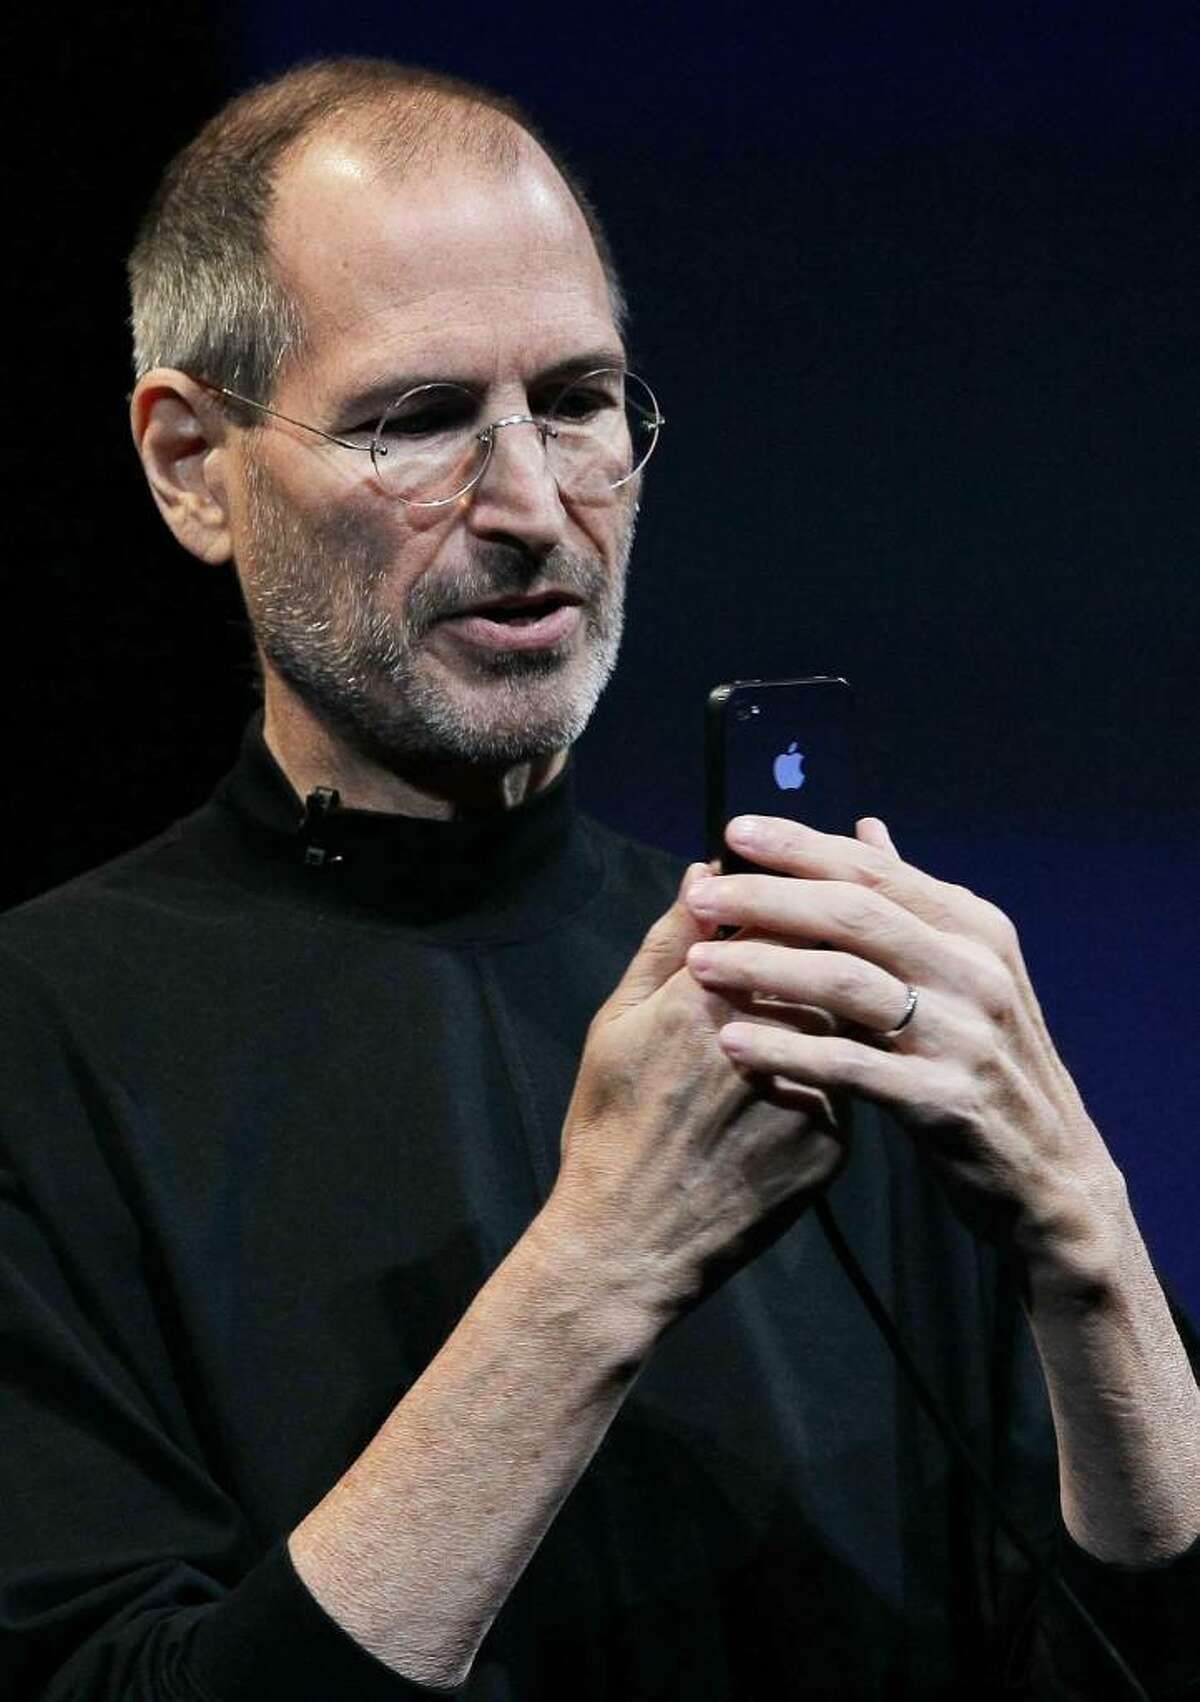 SAN FRANCISCO - JUNE 07: Apple CEO Steve Jobs demonstrates the new iPhone 4 as he delivers the opening keynote address at the 2010 Apple World Wide Developers conference June 7, 2010 in San Francisco, California. Jobs kicked off their annual WWDC with the announcement of the new iPhone 4. (Photo by Justin Sullivan/Getty Images) *** Local Caption *** Steve Jobs